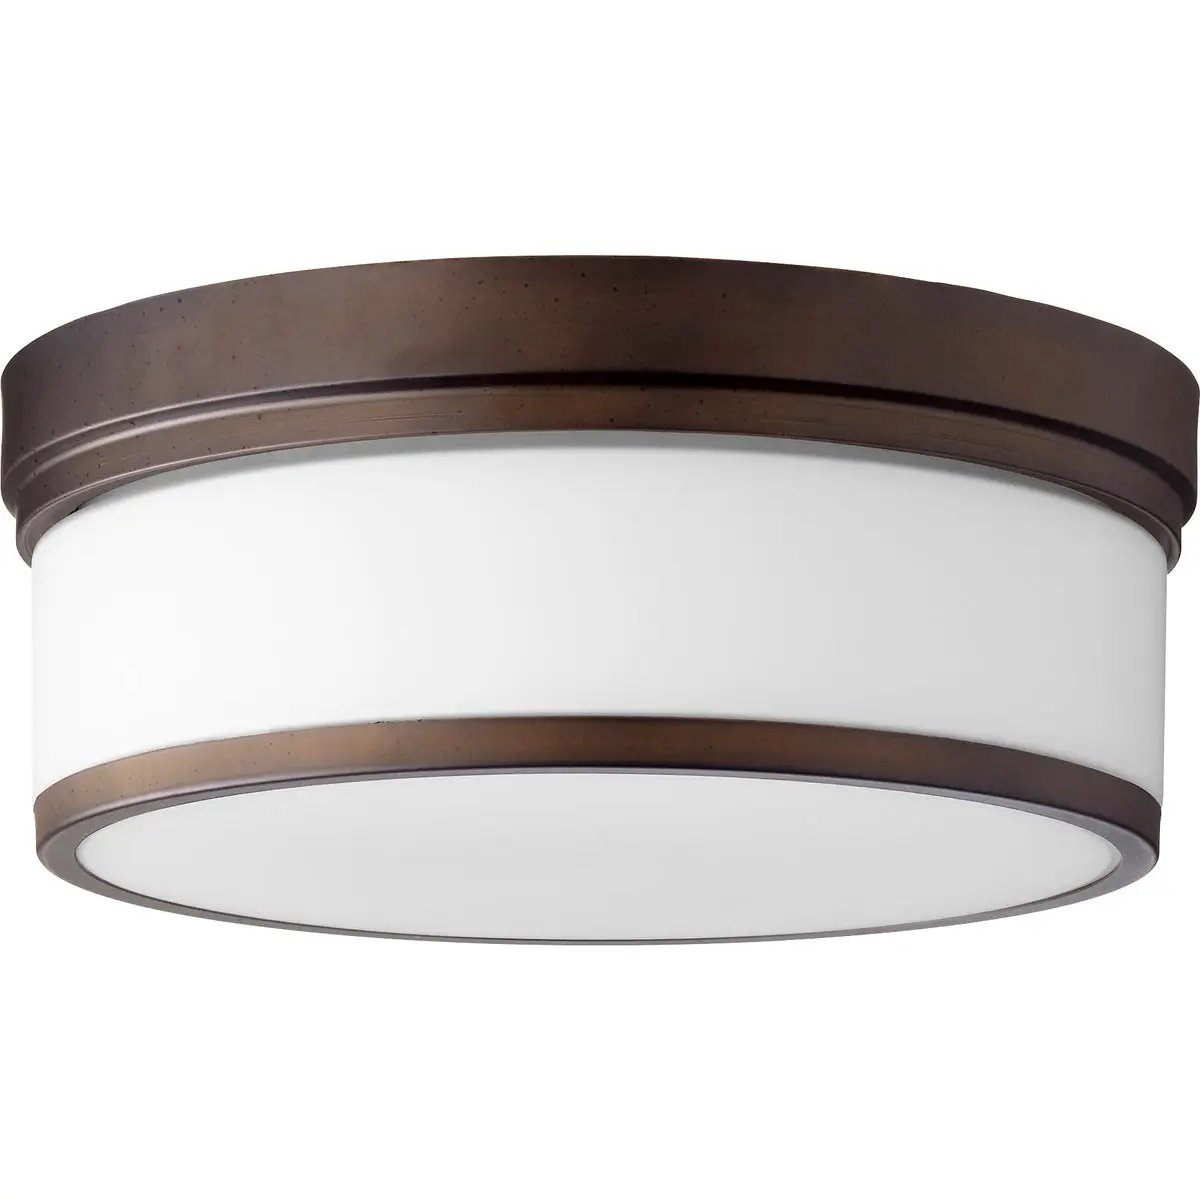 Modern Flush Mount Light with white shade, sleek design, and versatile style. Enhance any space with this Quorum International fixture. 60W, 3 bulbs, dimmable, UL Listed, 14"W x 5.5"H.